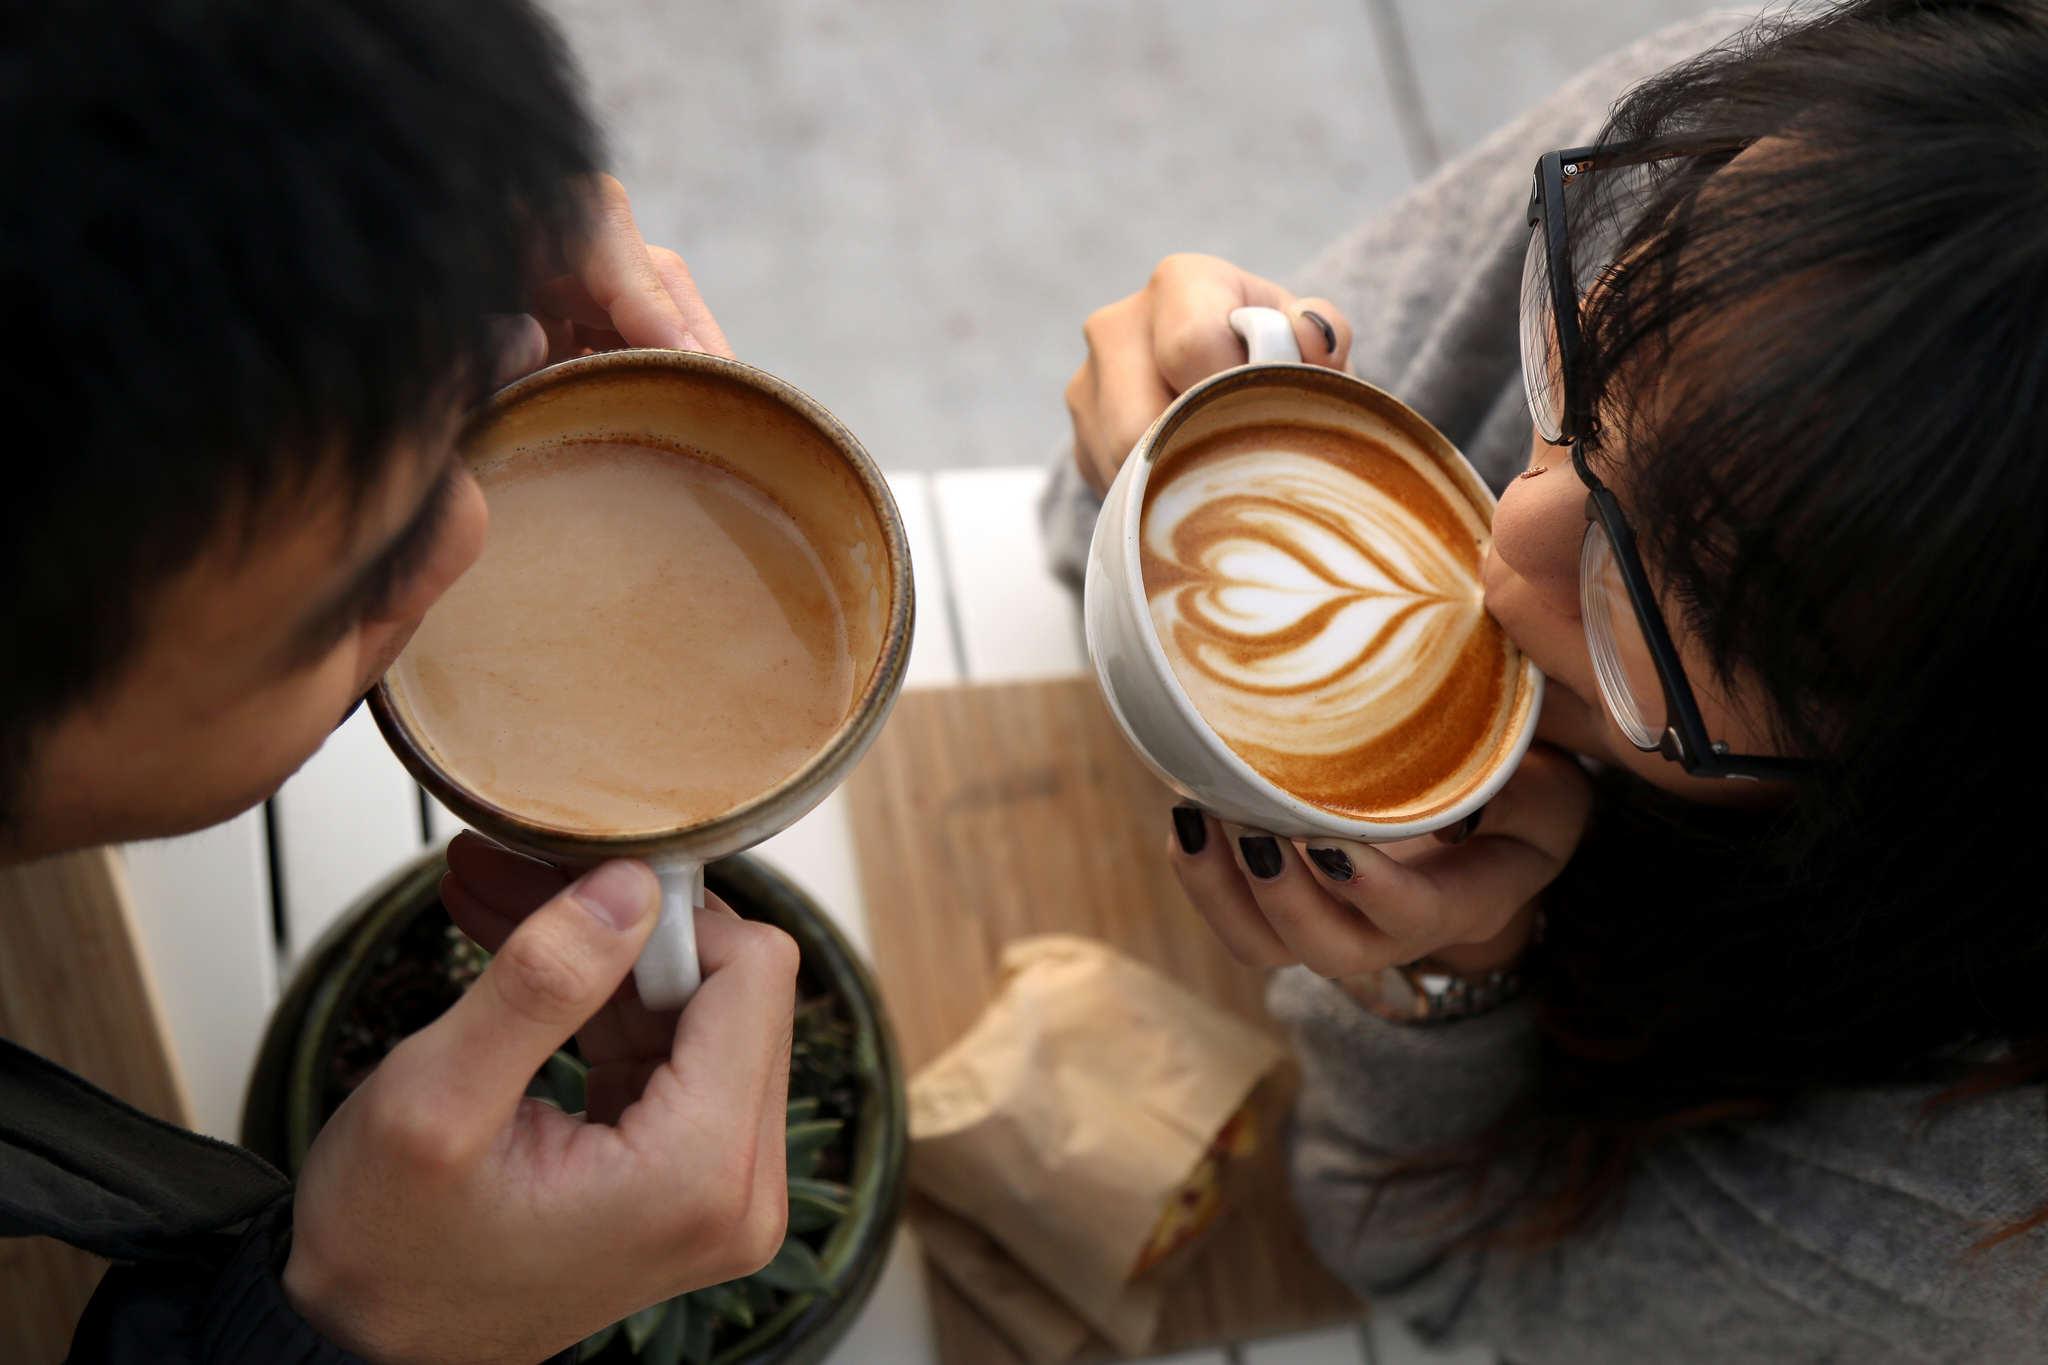 Adrian Chen, BECA major and Tina Huang, international business major drink lattes at Andytown Coffee Roasters in the Outer Sunset of San Francisco on Wednesday Feb 11. One of their favorite ways they enjoy spending time together. (Emma Chiang / Xpress)